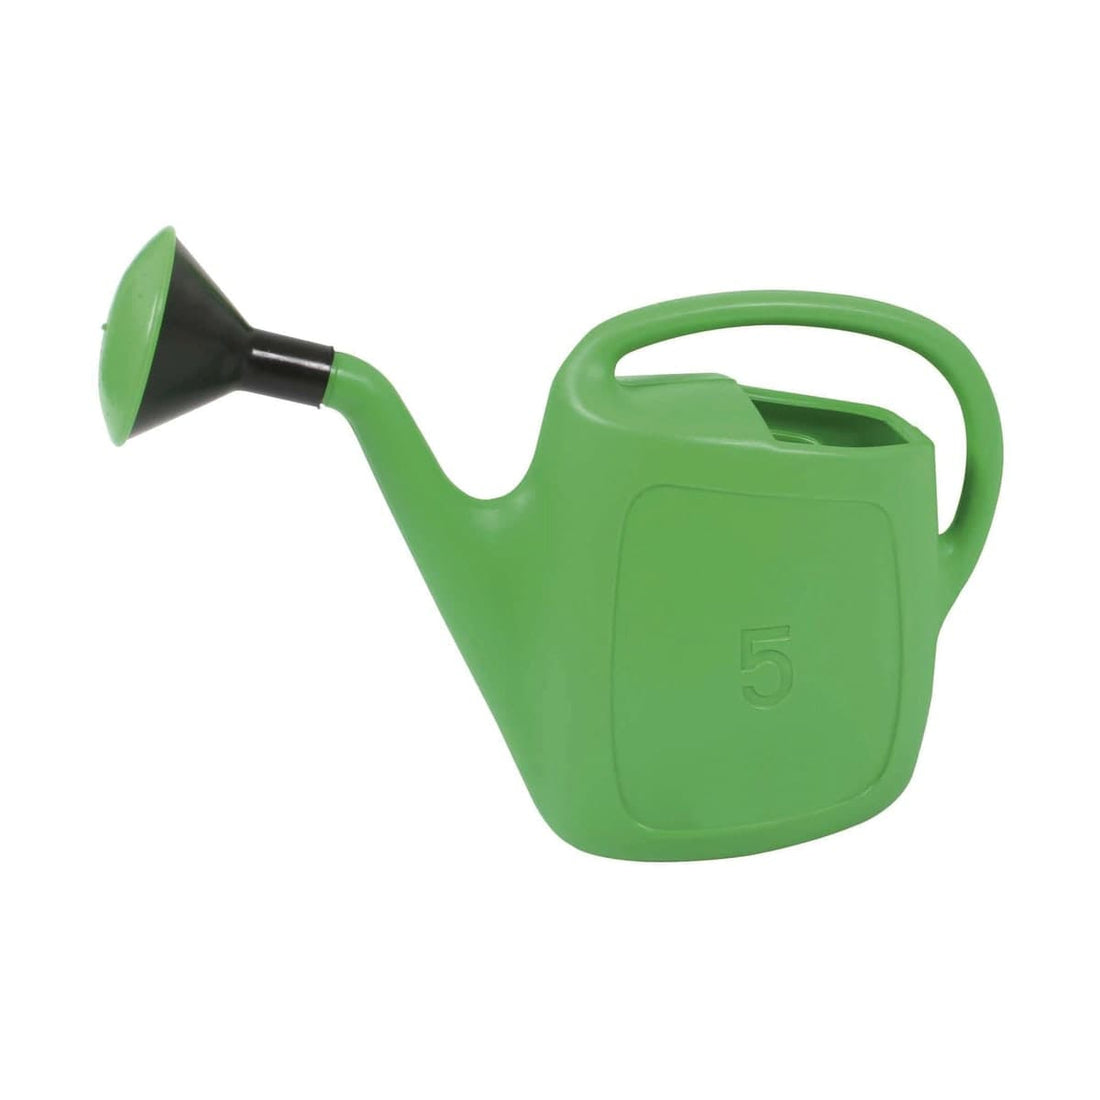 PLASTIC WATERING CAN 5 L - best price from Maltashopper.com BR500430016